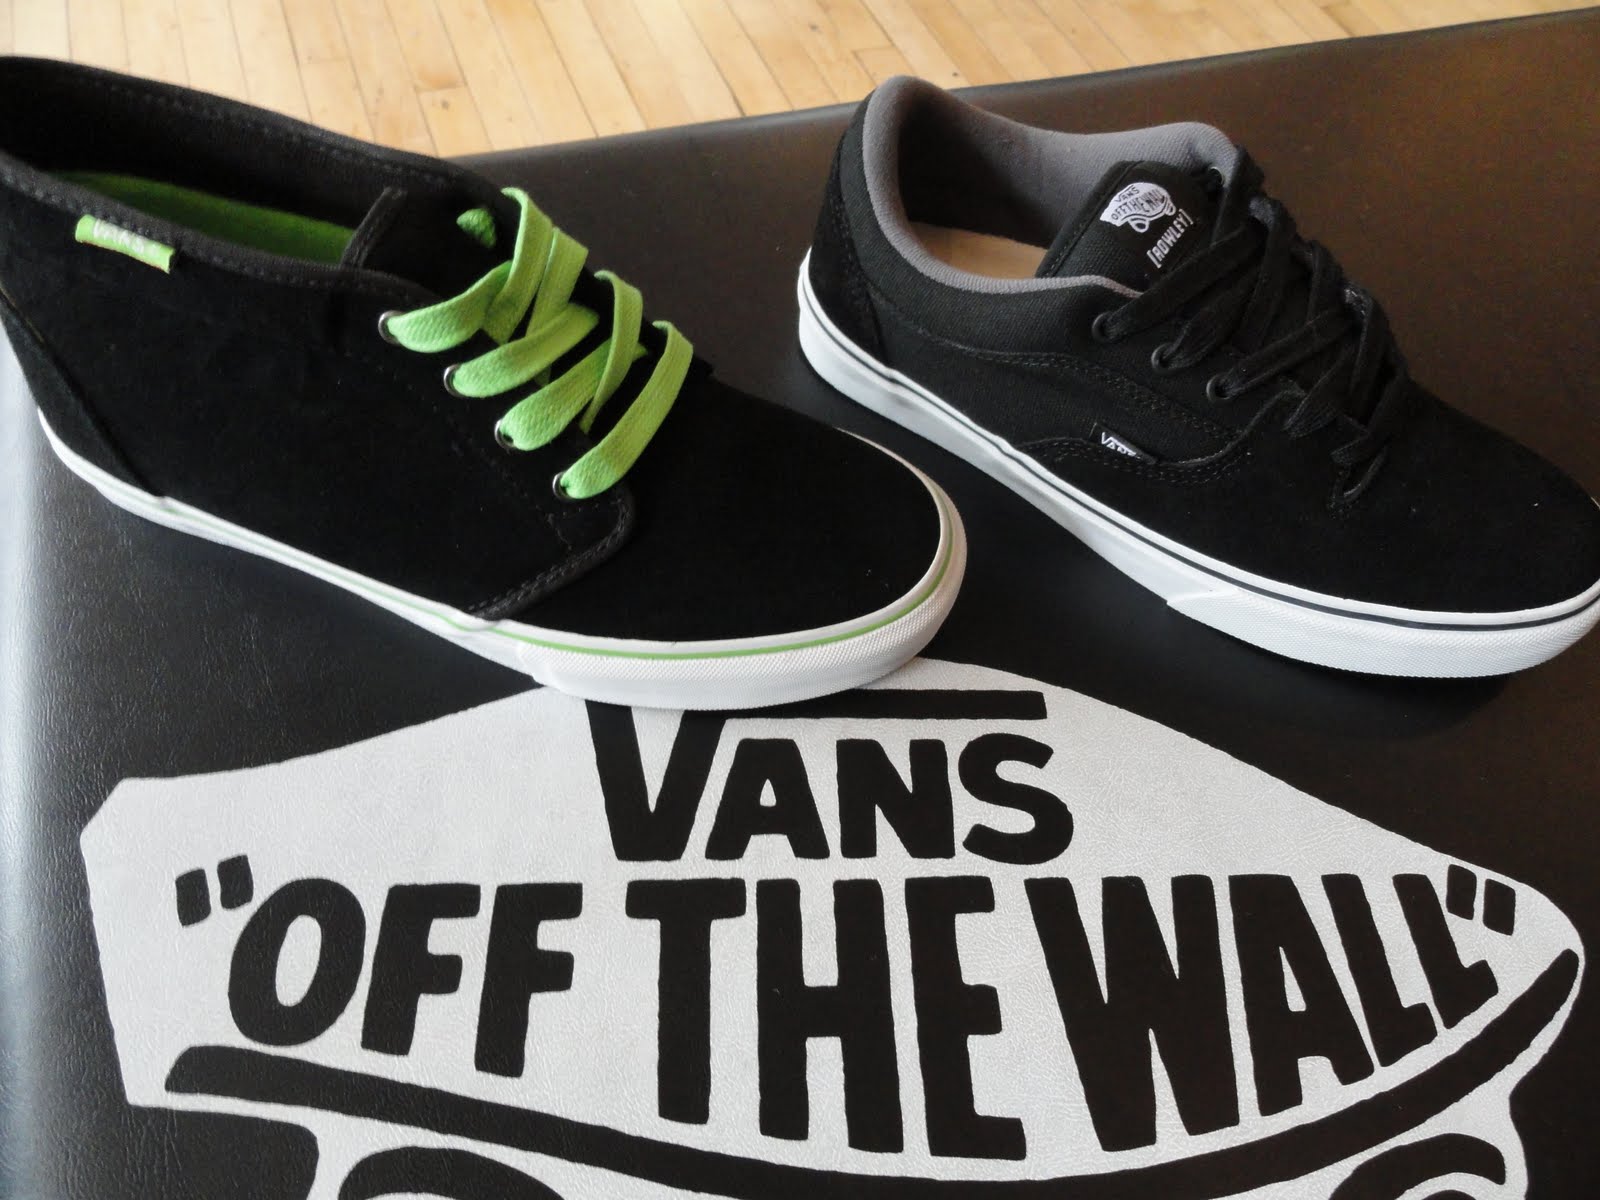 Subsect: New Vans...Style Bro!!!